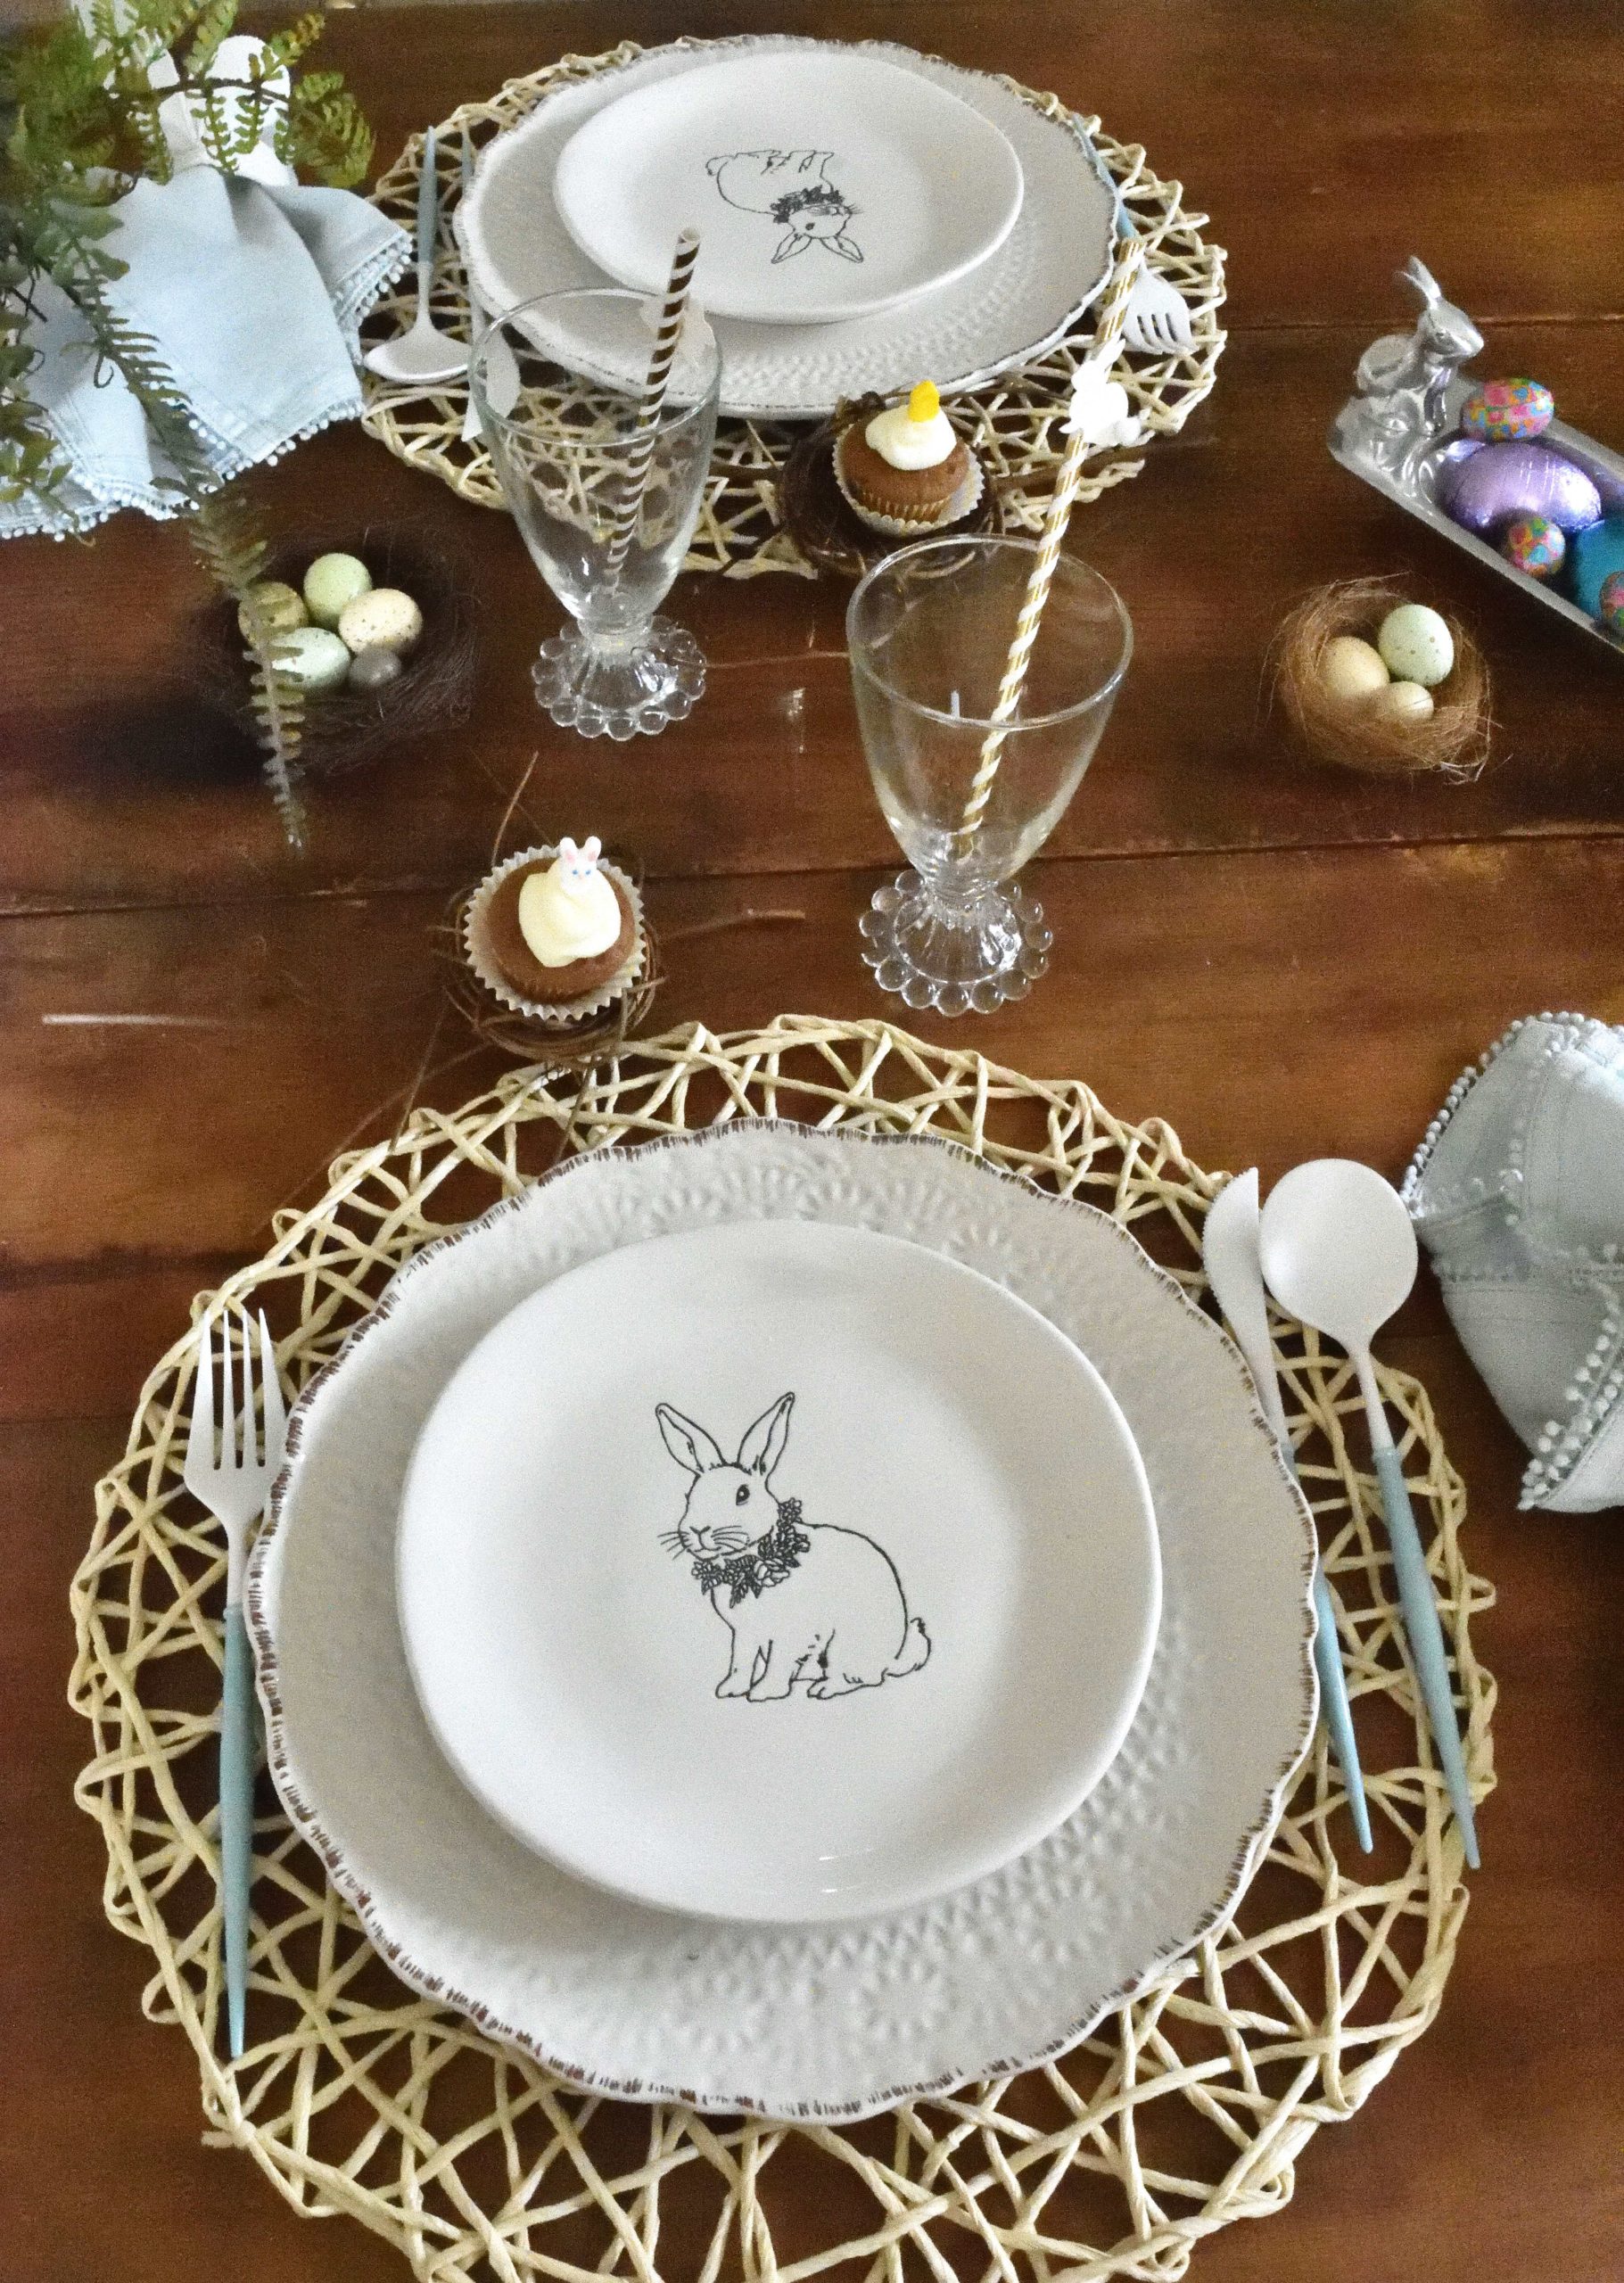 Simple Easter place setting